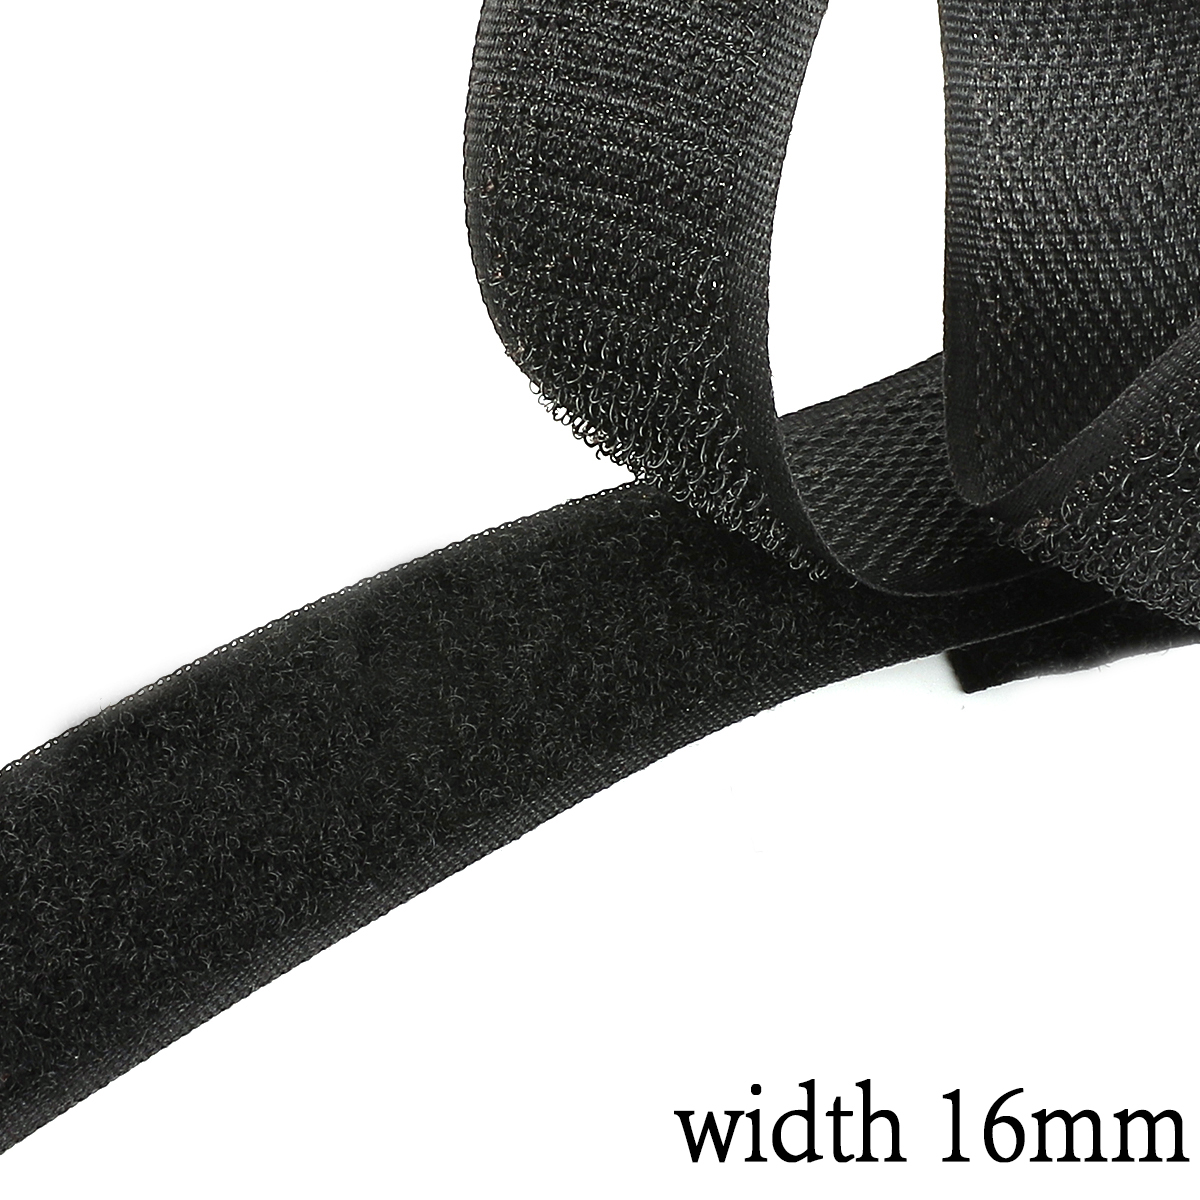 2M 16-40mm Black Not Adhesive Hook and Loop Fastener Tape Sticker Velcros Nylon Magic Tape for DIY Craft Supply Roll Sew On Tape: Black 16mm width